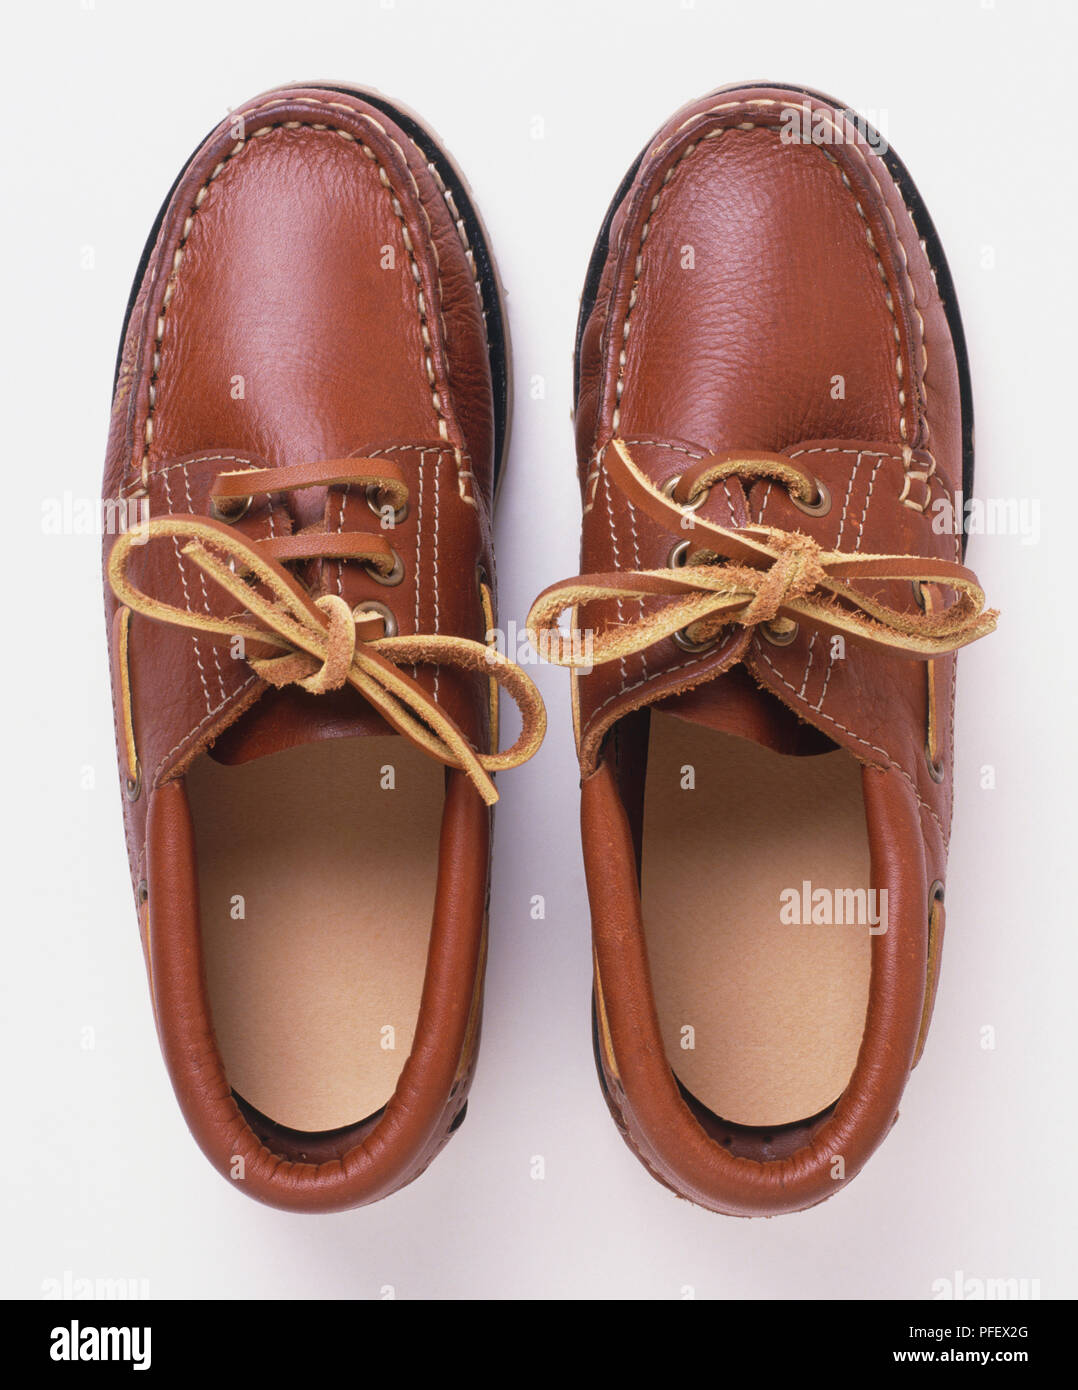 Pair of men's brown leather shoes with matching leather laces, view from  above Stock Photo - Alamy